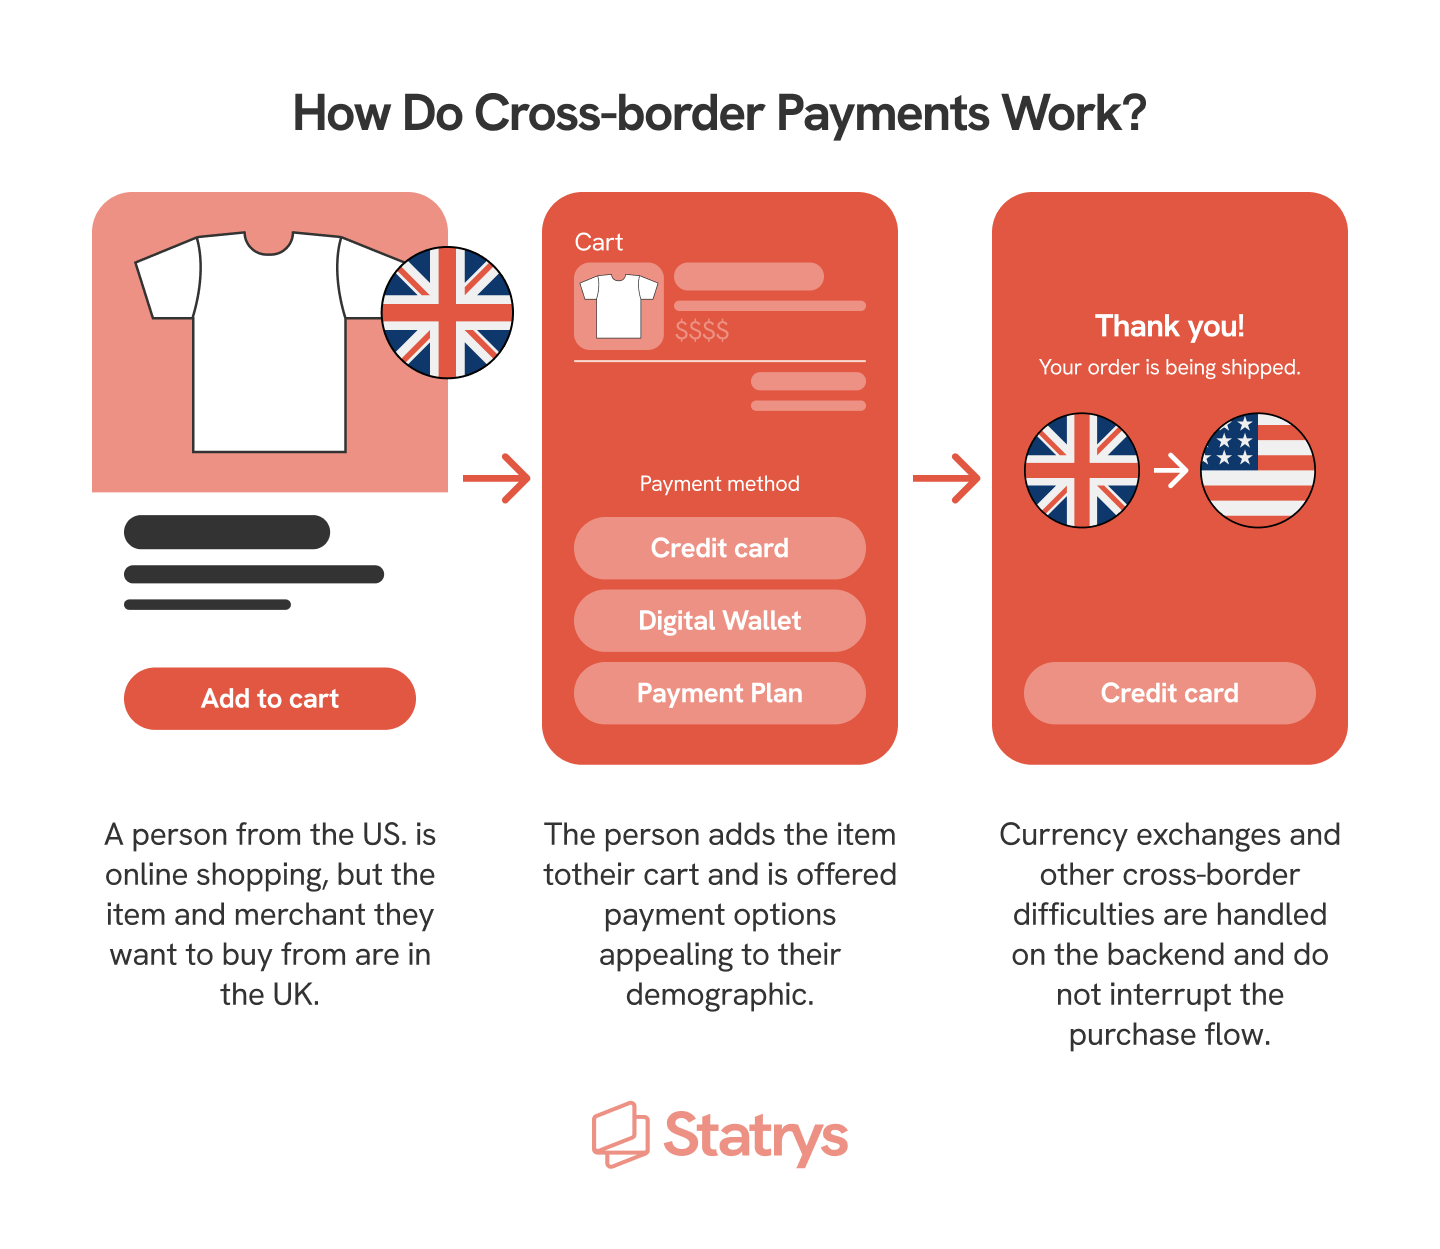 An infographic showing how cross-border payments work when a person purchase clothes from an app in the US